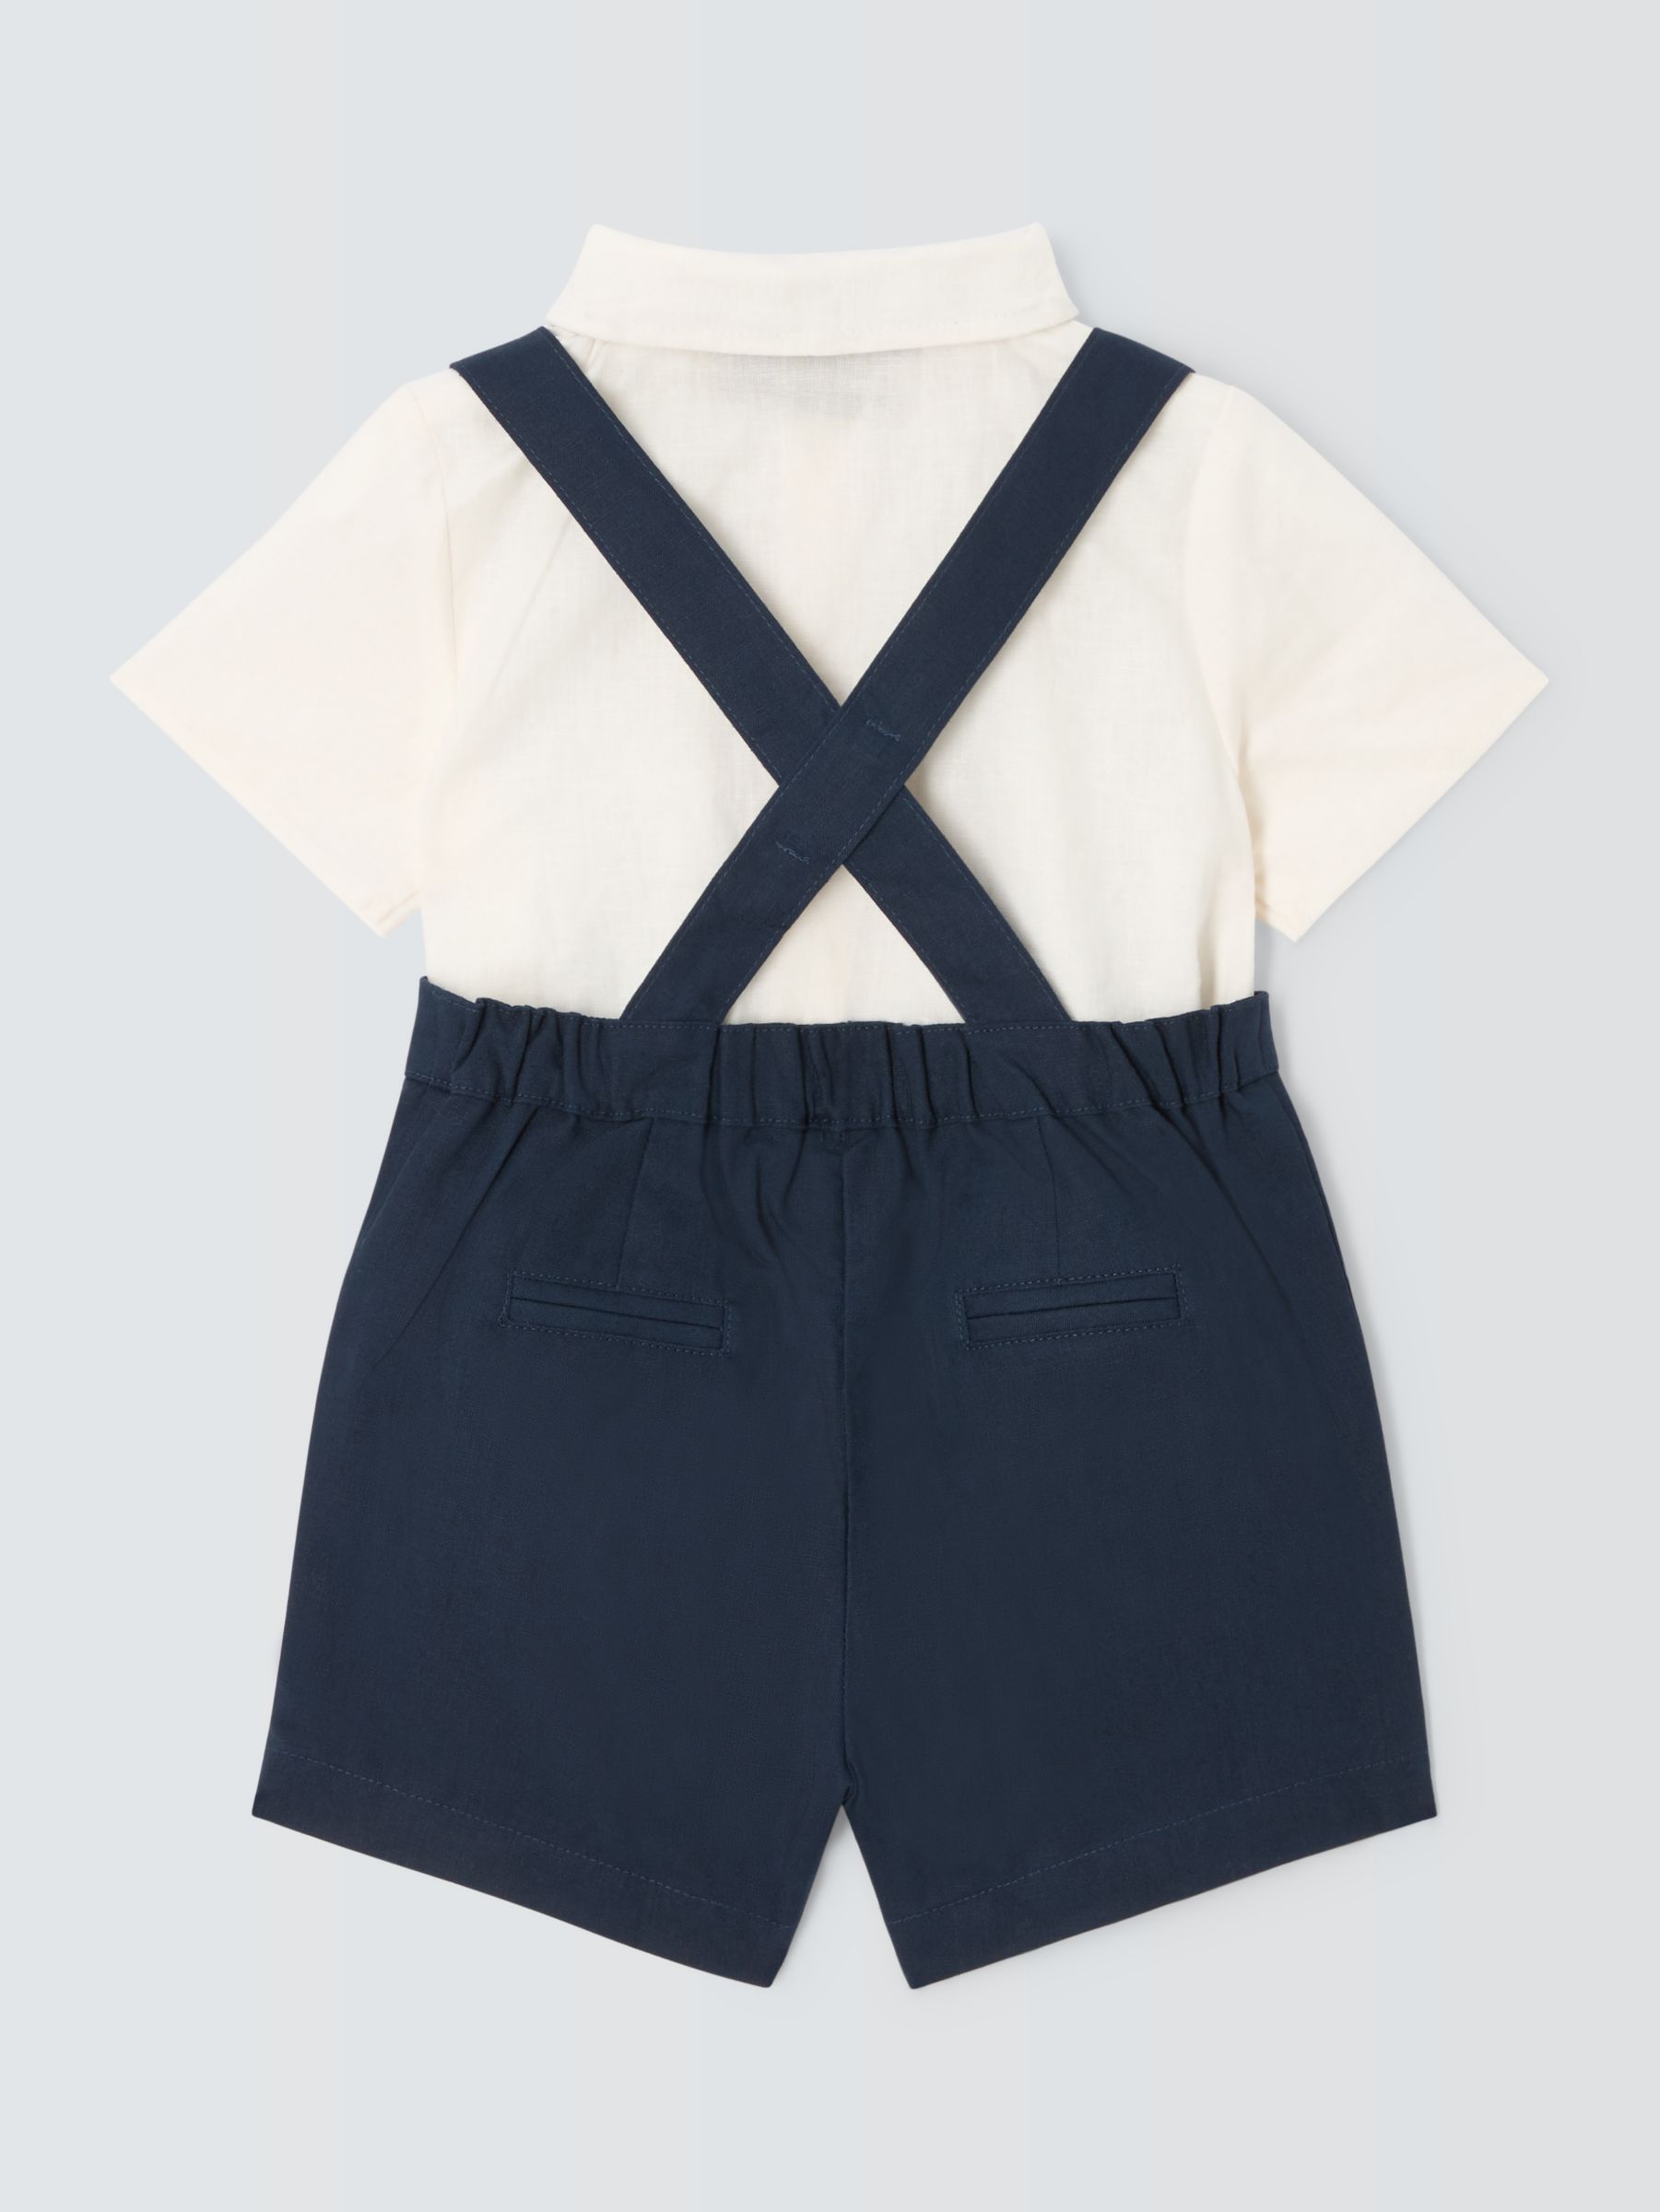 John Lewis Heirloom Collection Baby Bodysuit, Shorts & Bow Tie, Set of 3, Navy, 9-12 months